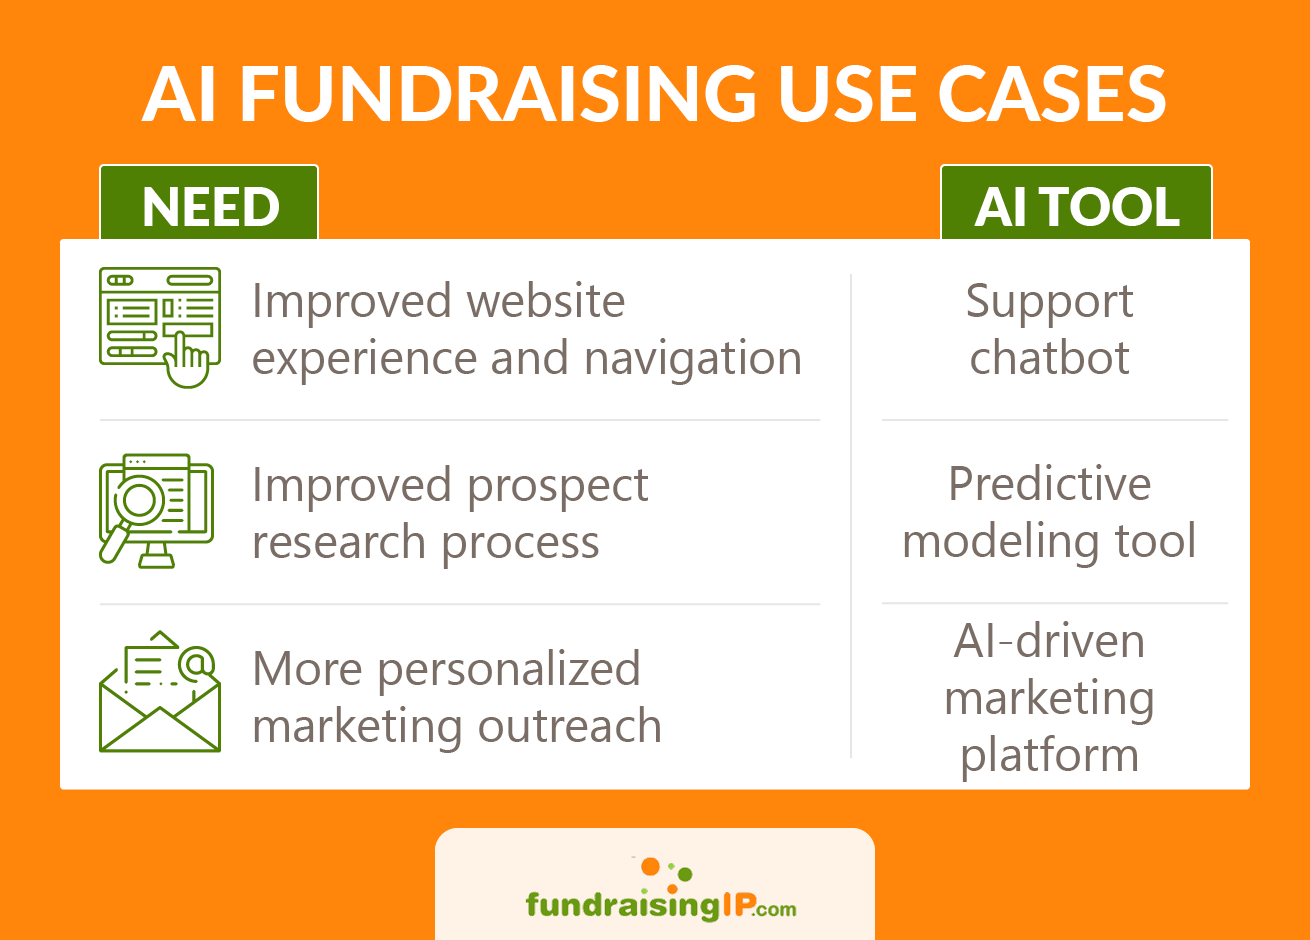 This image summarizes the AI fundraising use cases explained in the list above. 